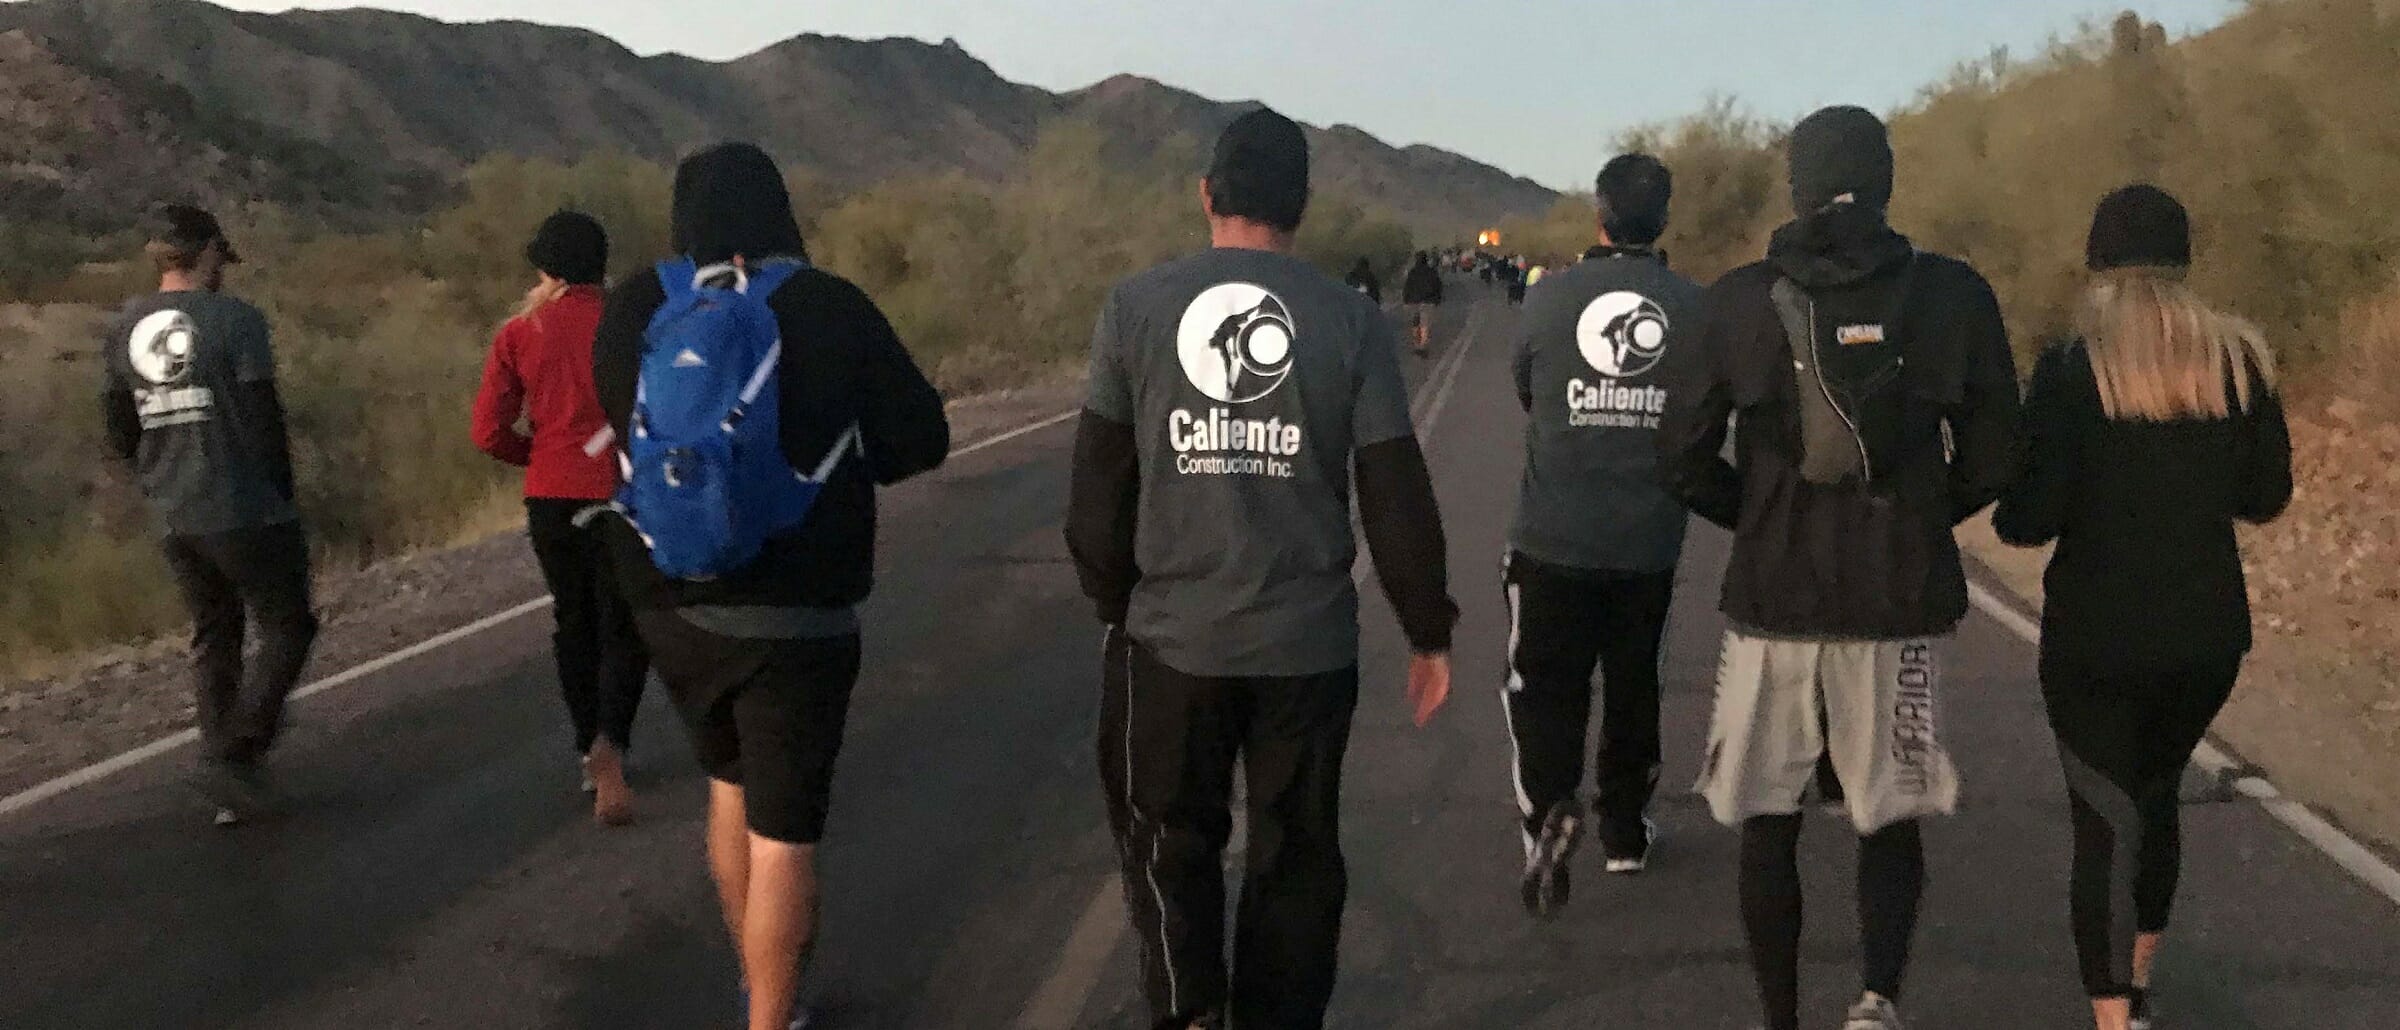 Join Caliente’s Climb to Conquer Cancer Phoenix team